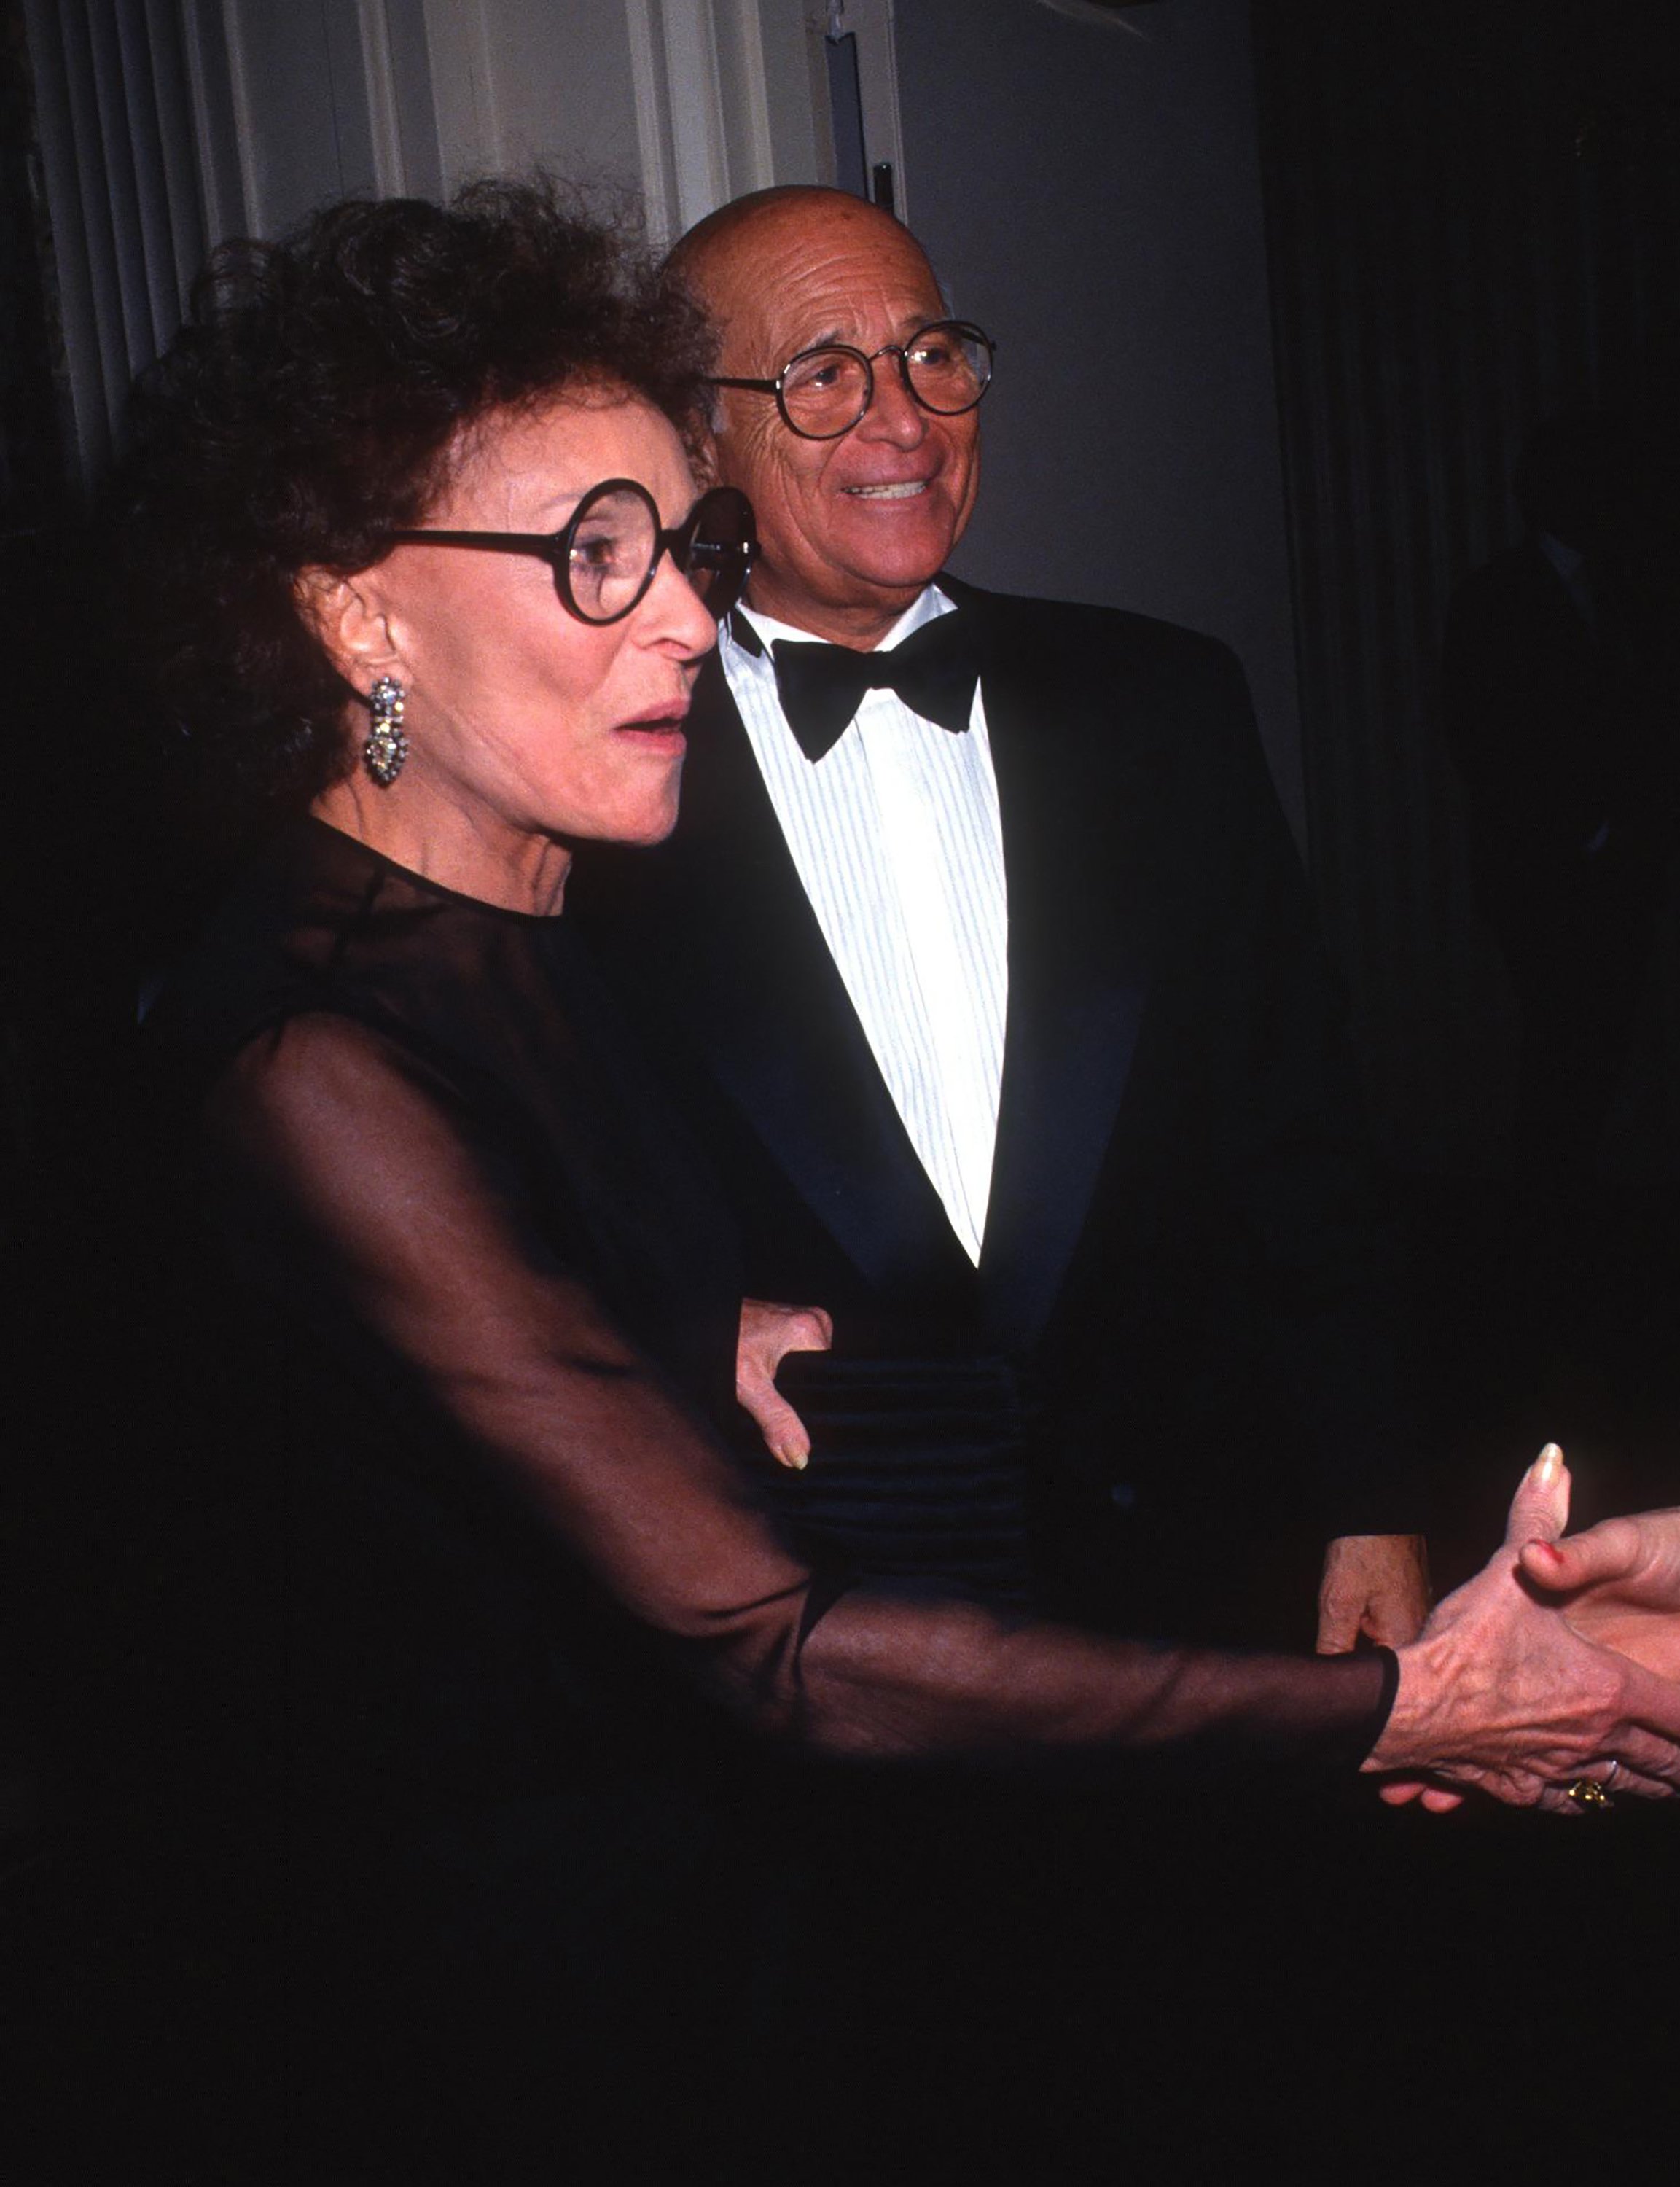 Frances Lear and Norman Lear attend the 10th Annual People for the American Way's 'Spirit of Liberty' Awards at the Waldorf Astoria Hotel, New York, New York, November 18, 1990 | Source: Getty Images 